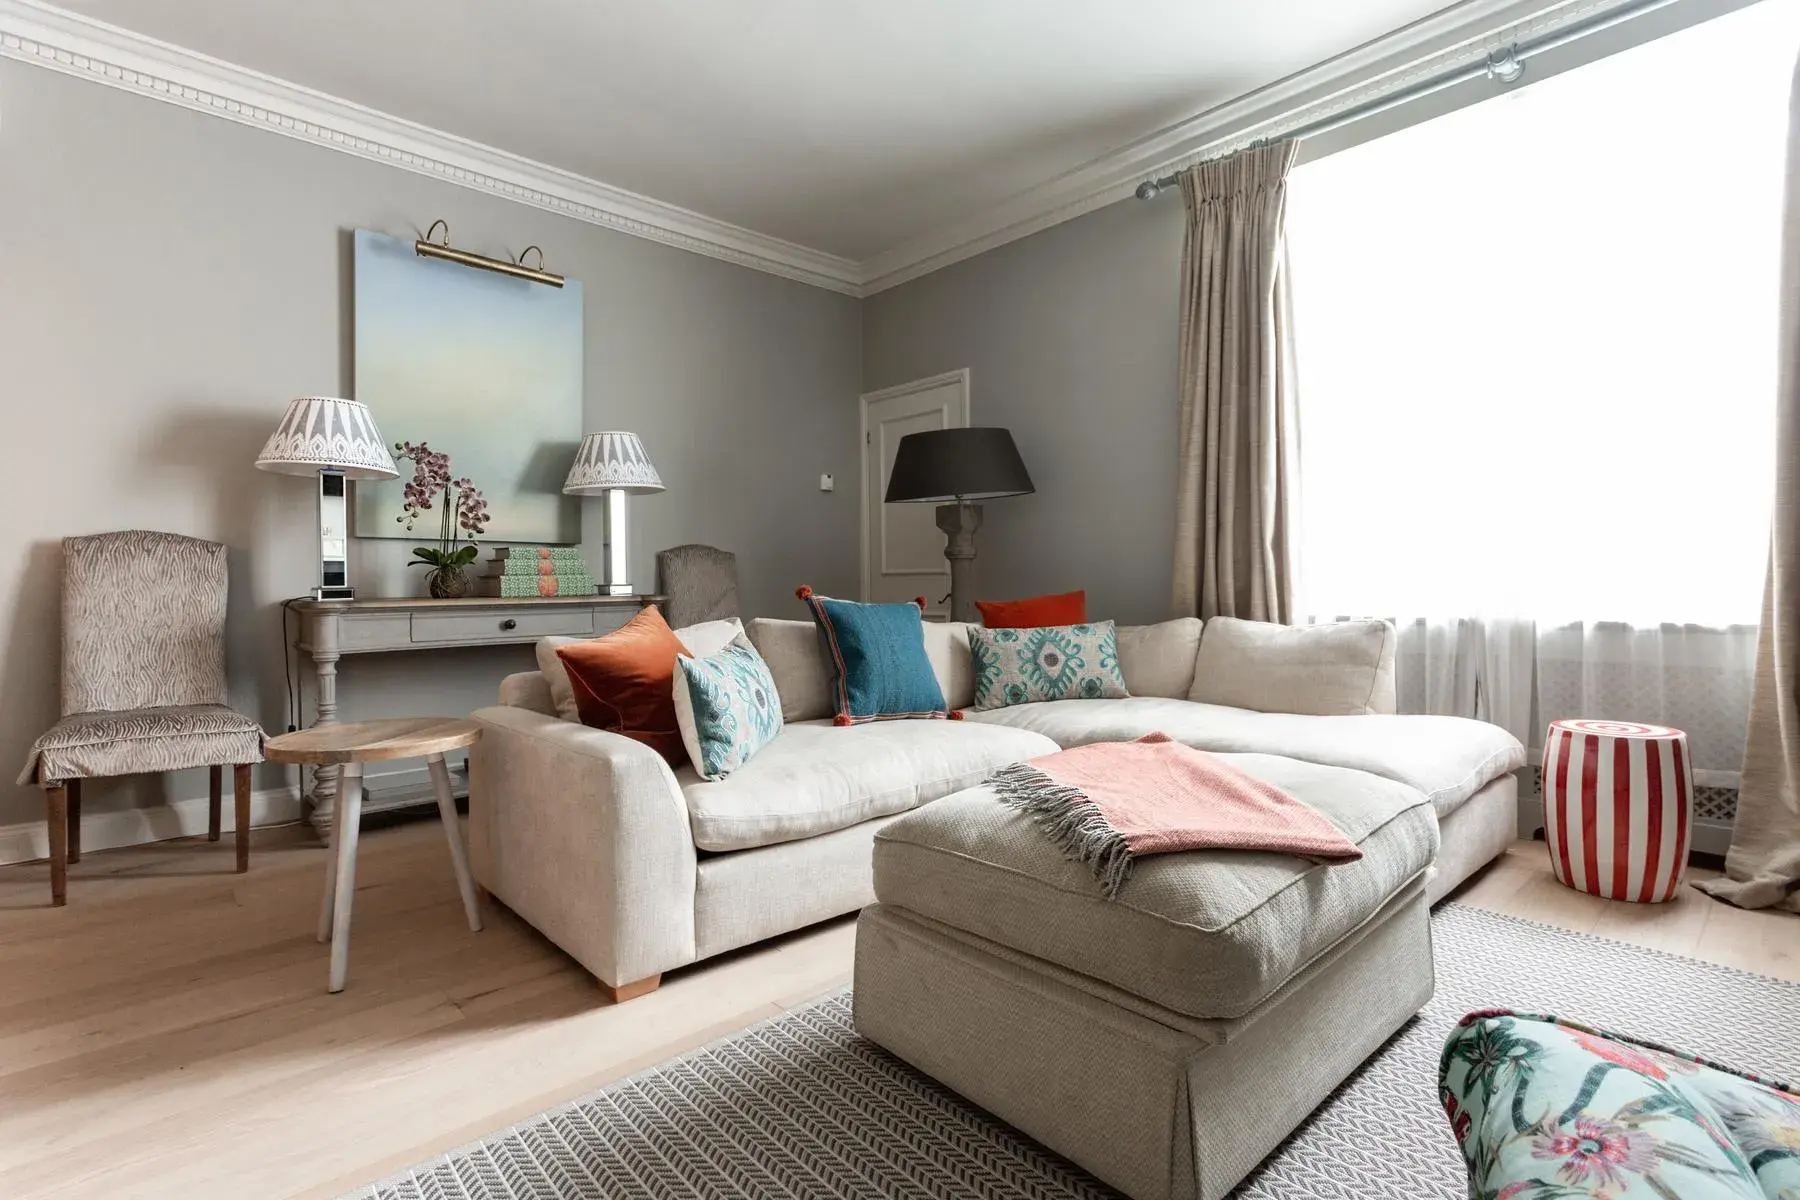 Claverton street, holiday home in Pimlico, London